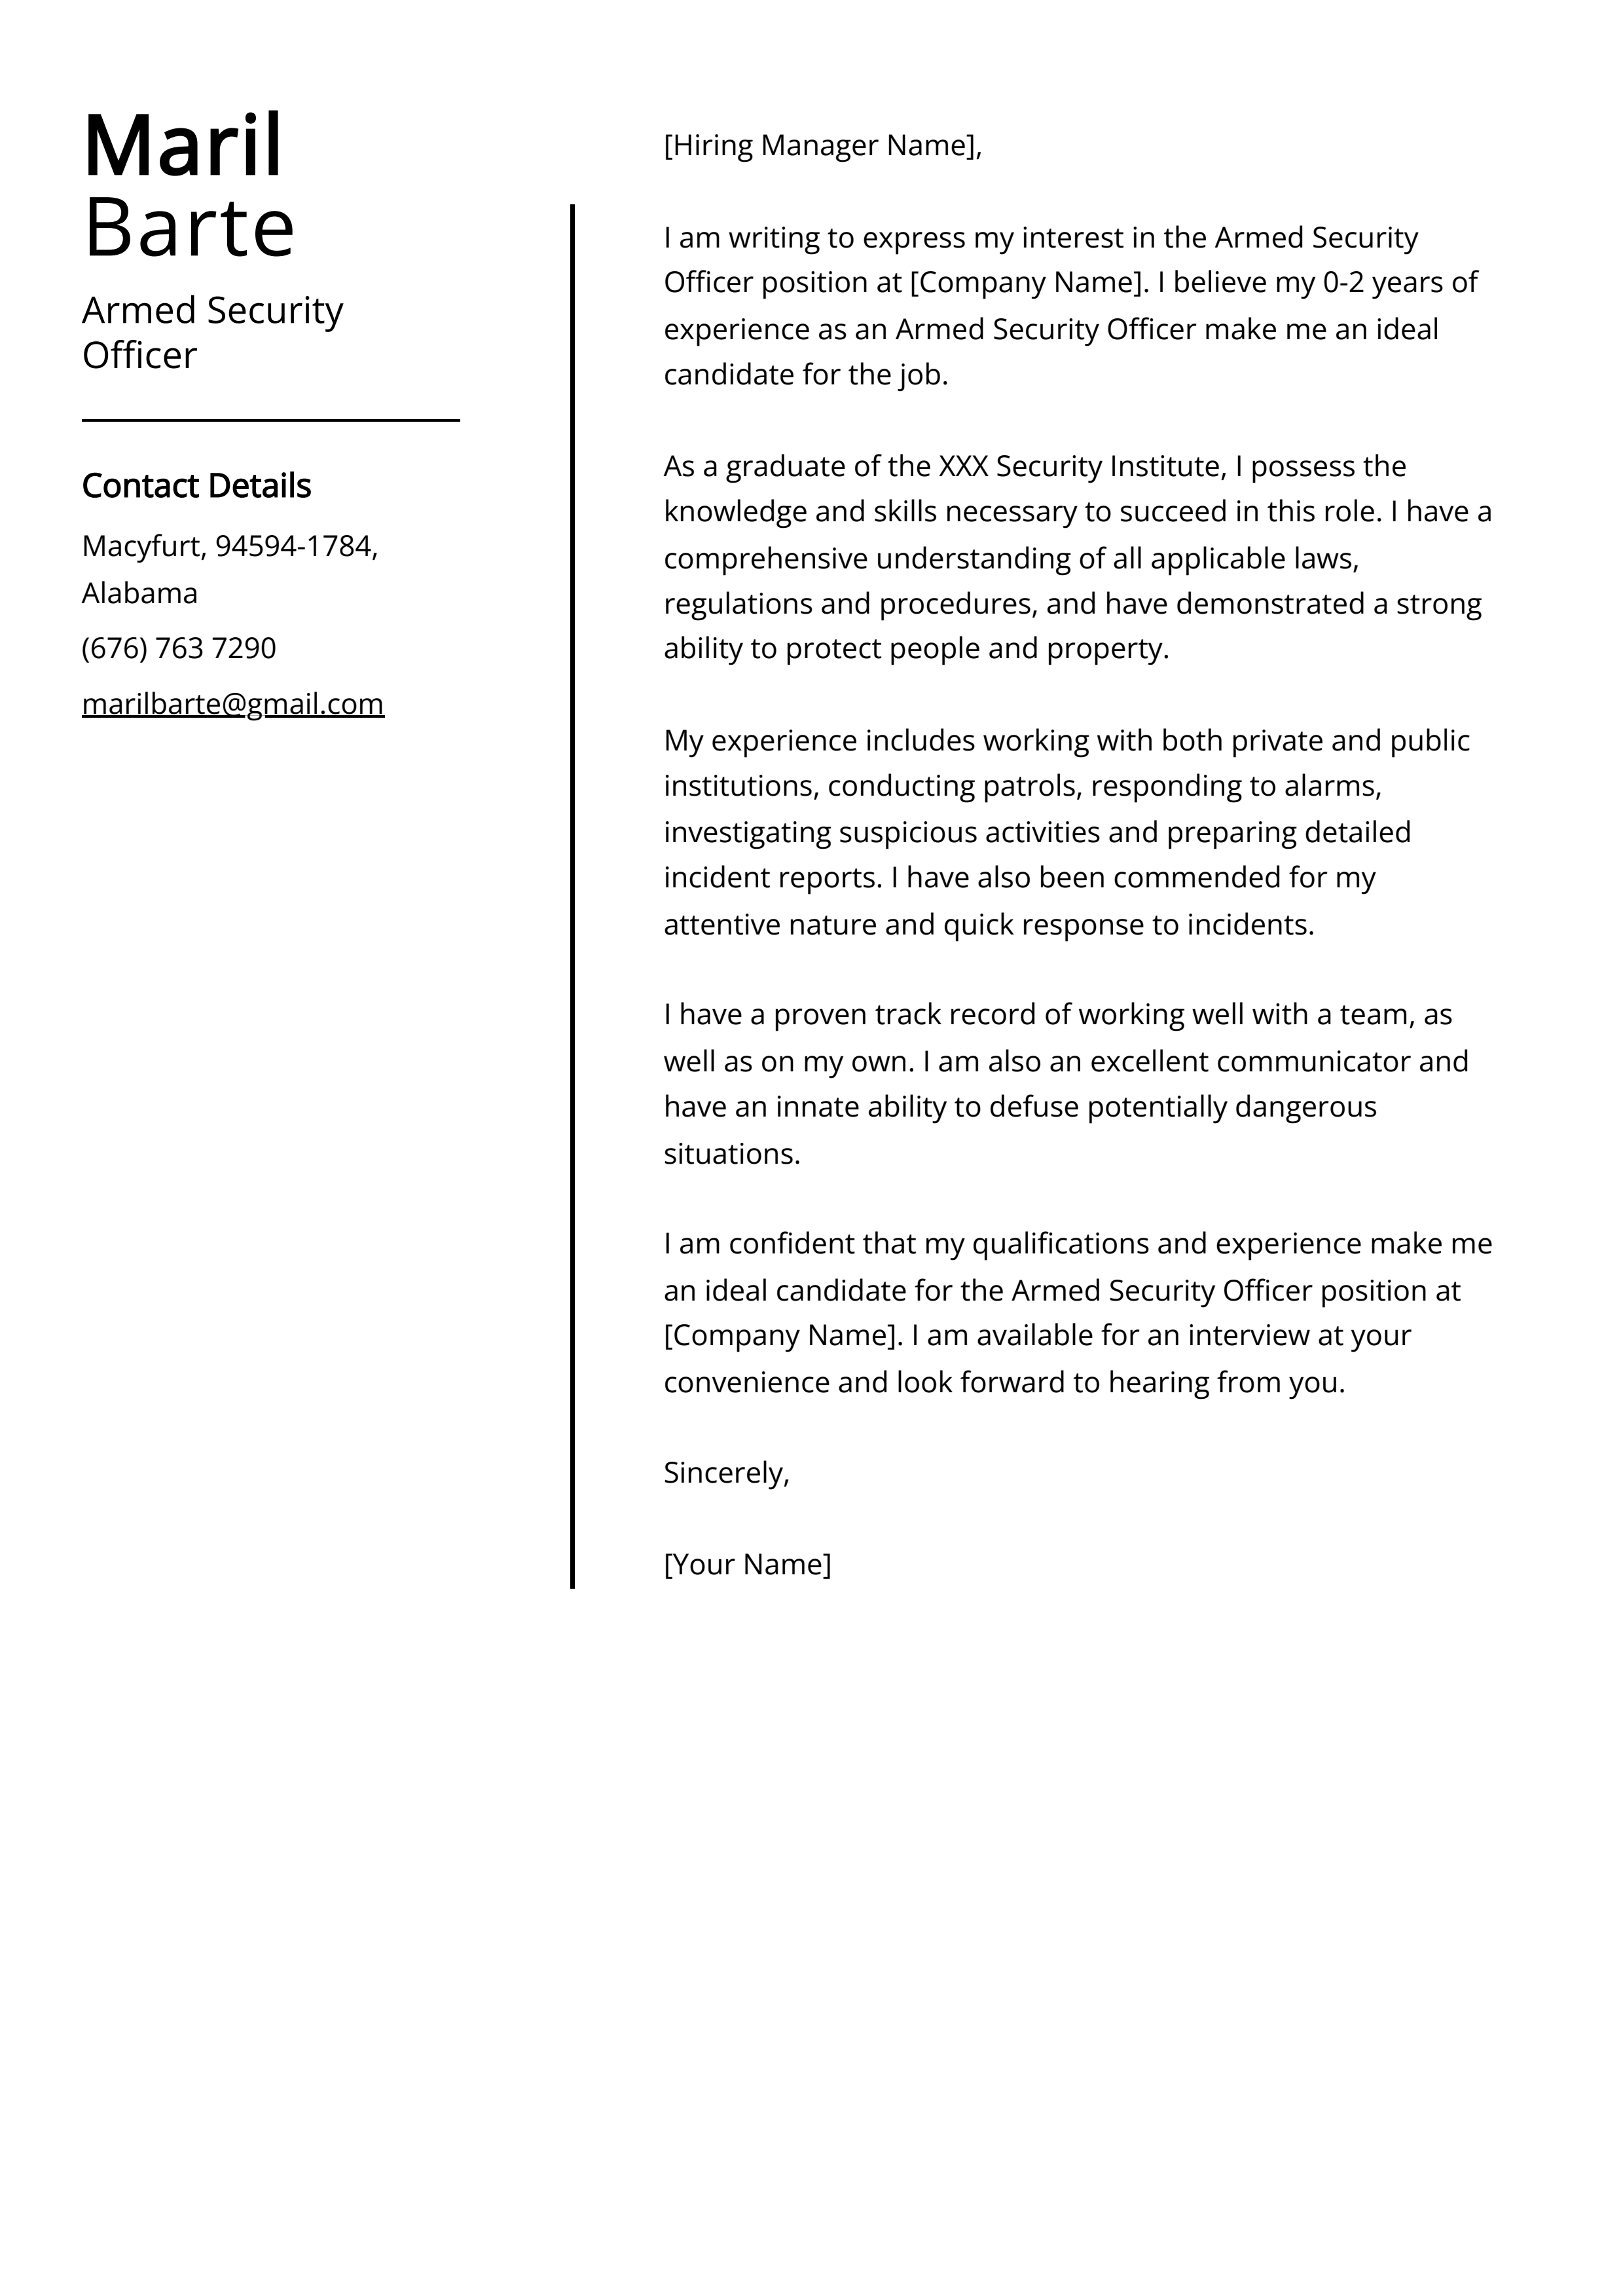 Armed Security Officer Cover Letter Example